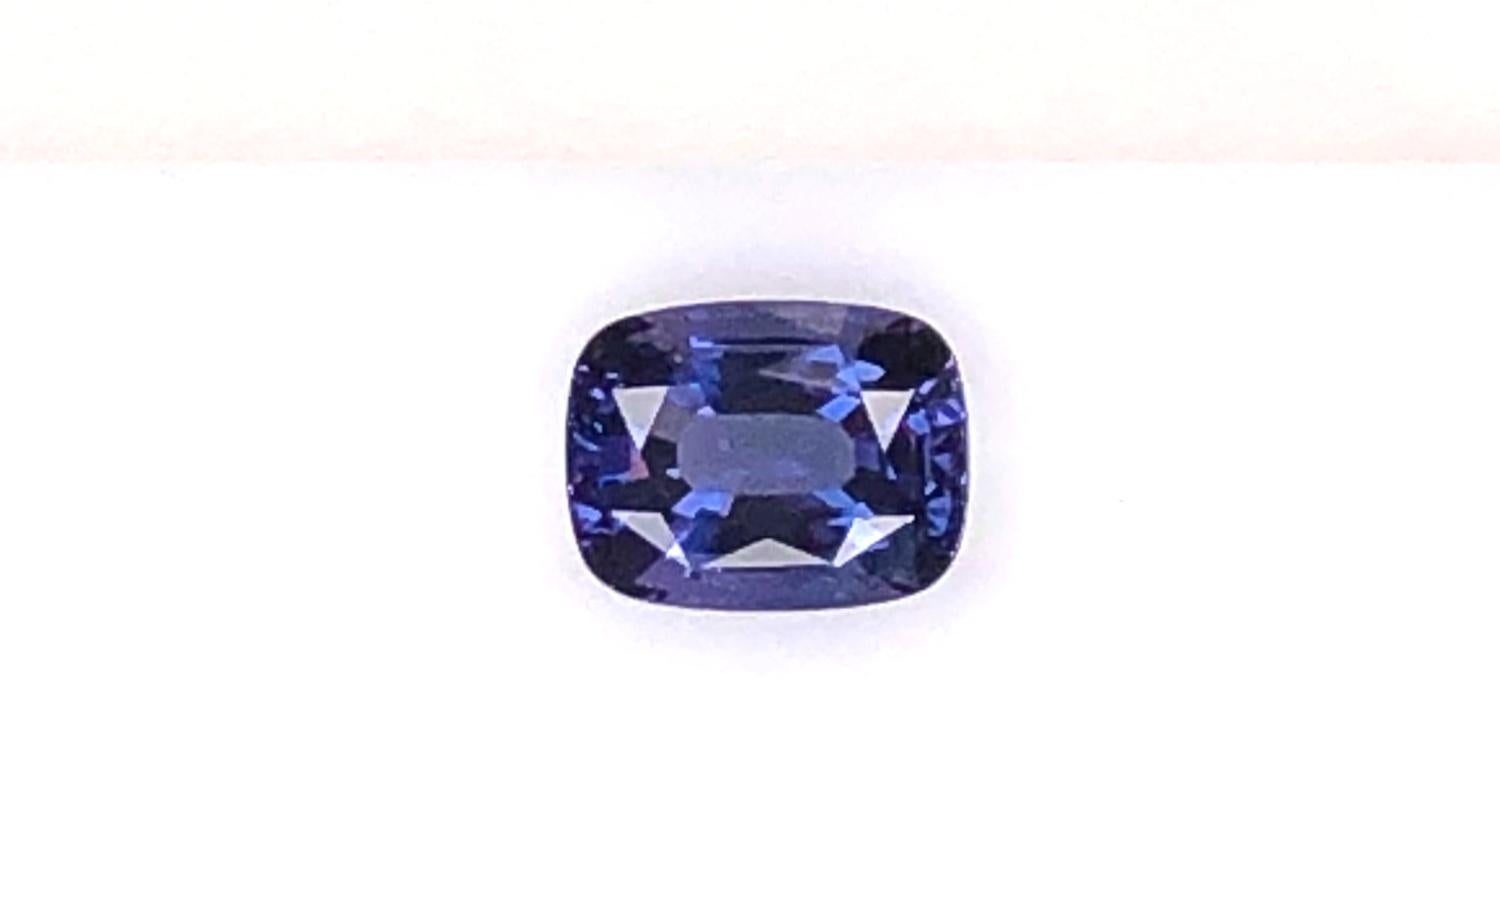 Privately Curated Collection of Unset Loose Fancy Spinel Gemstones, 89.77 Carats 7